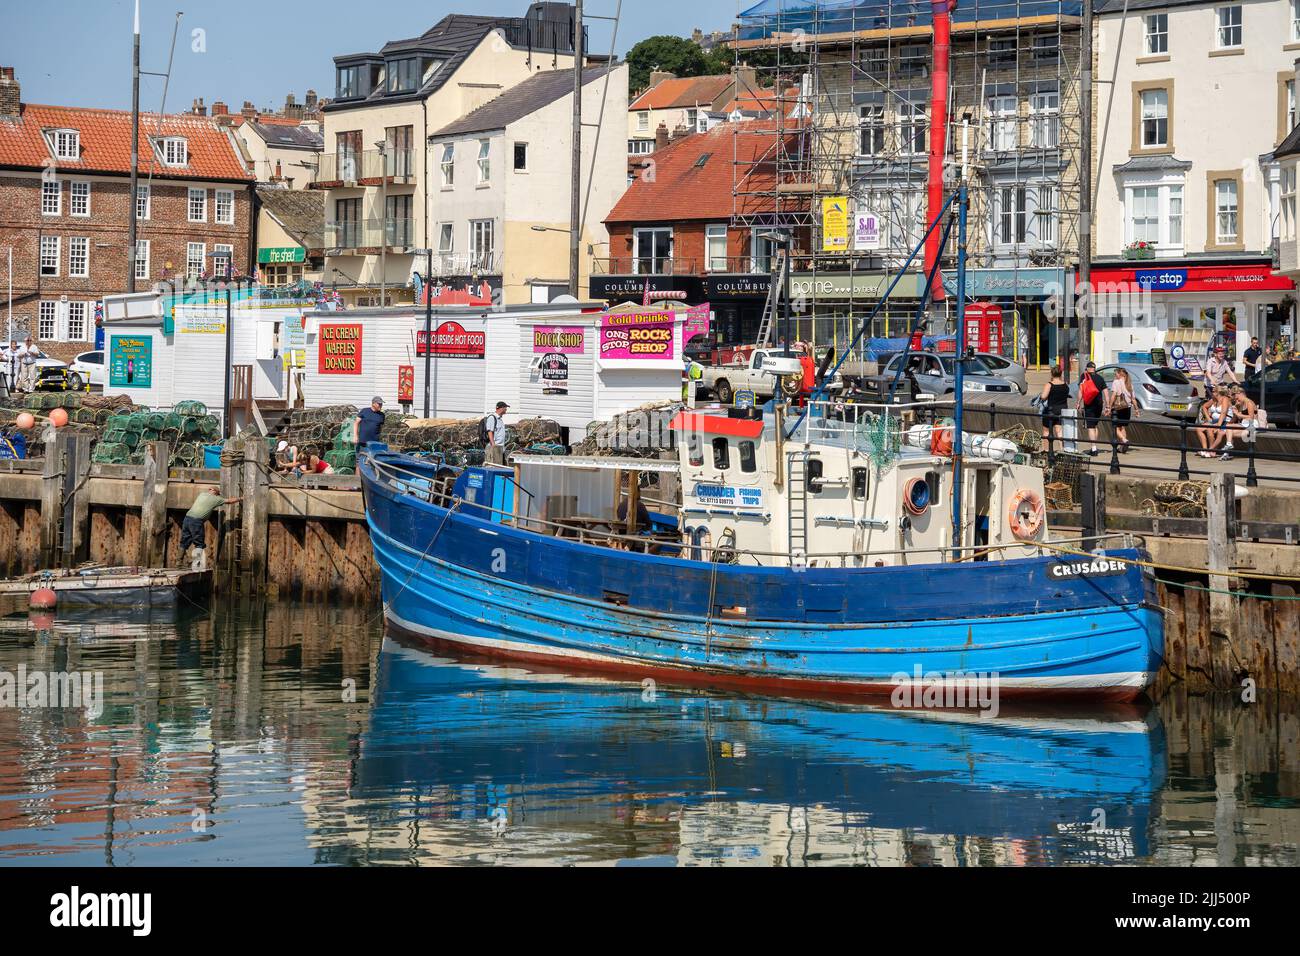 SCARBOROUGH,  NORTH YORKSHIRE, UK - JULY 18: View of the seafront in Scarborough, North Yorkshire on July 18, 2022. Unidentified people Stock Photo